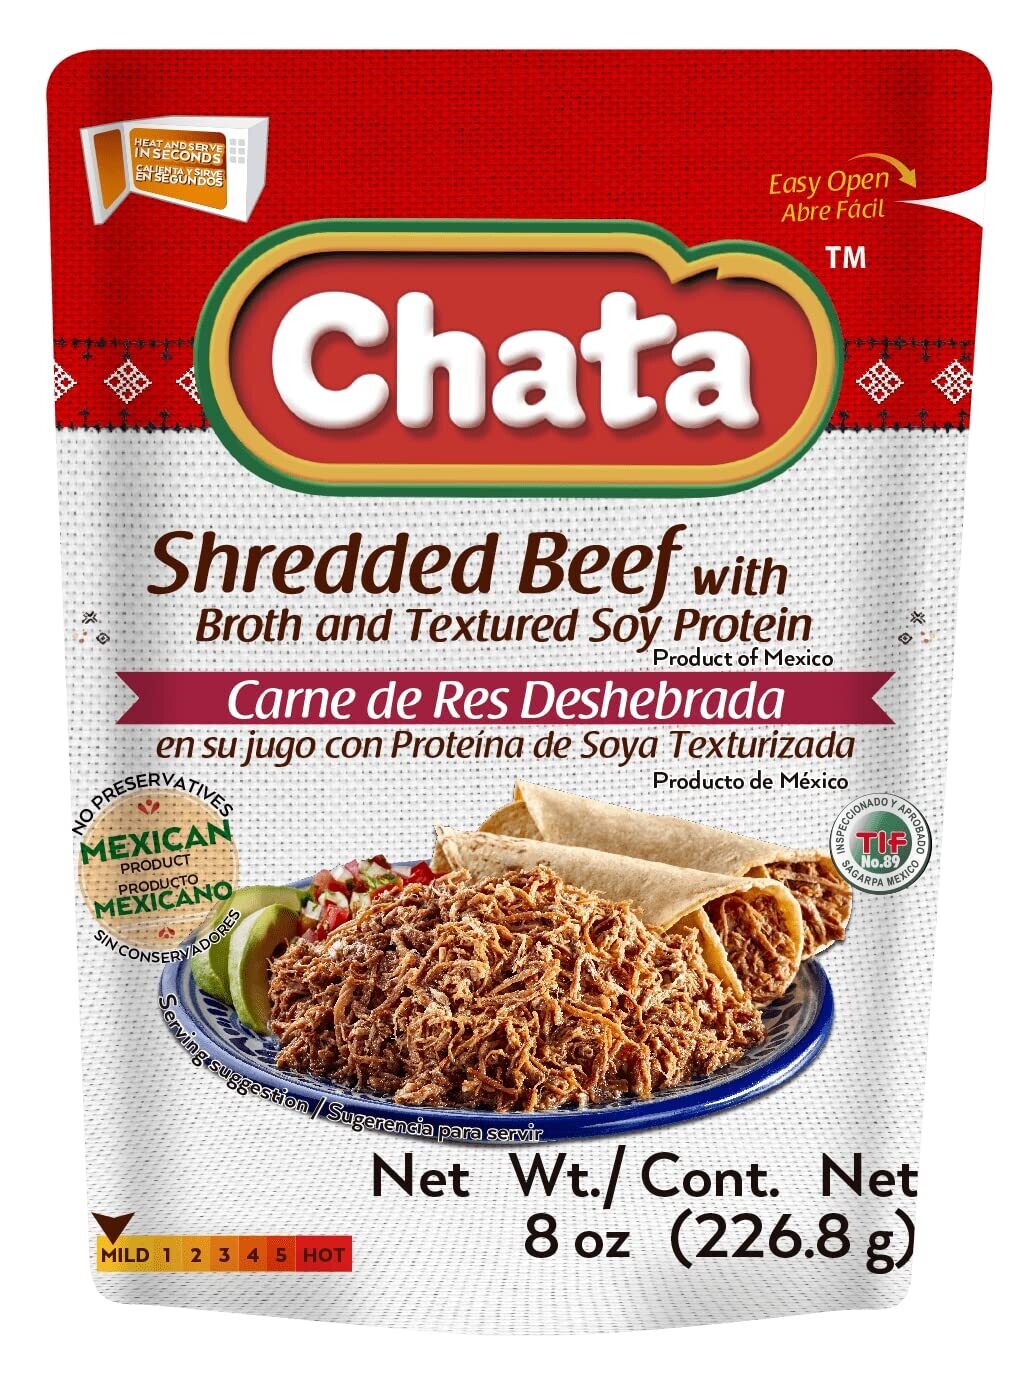 Chata Shredded Beef with Broth and Textured Soy Protein